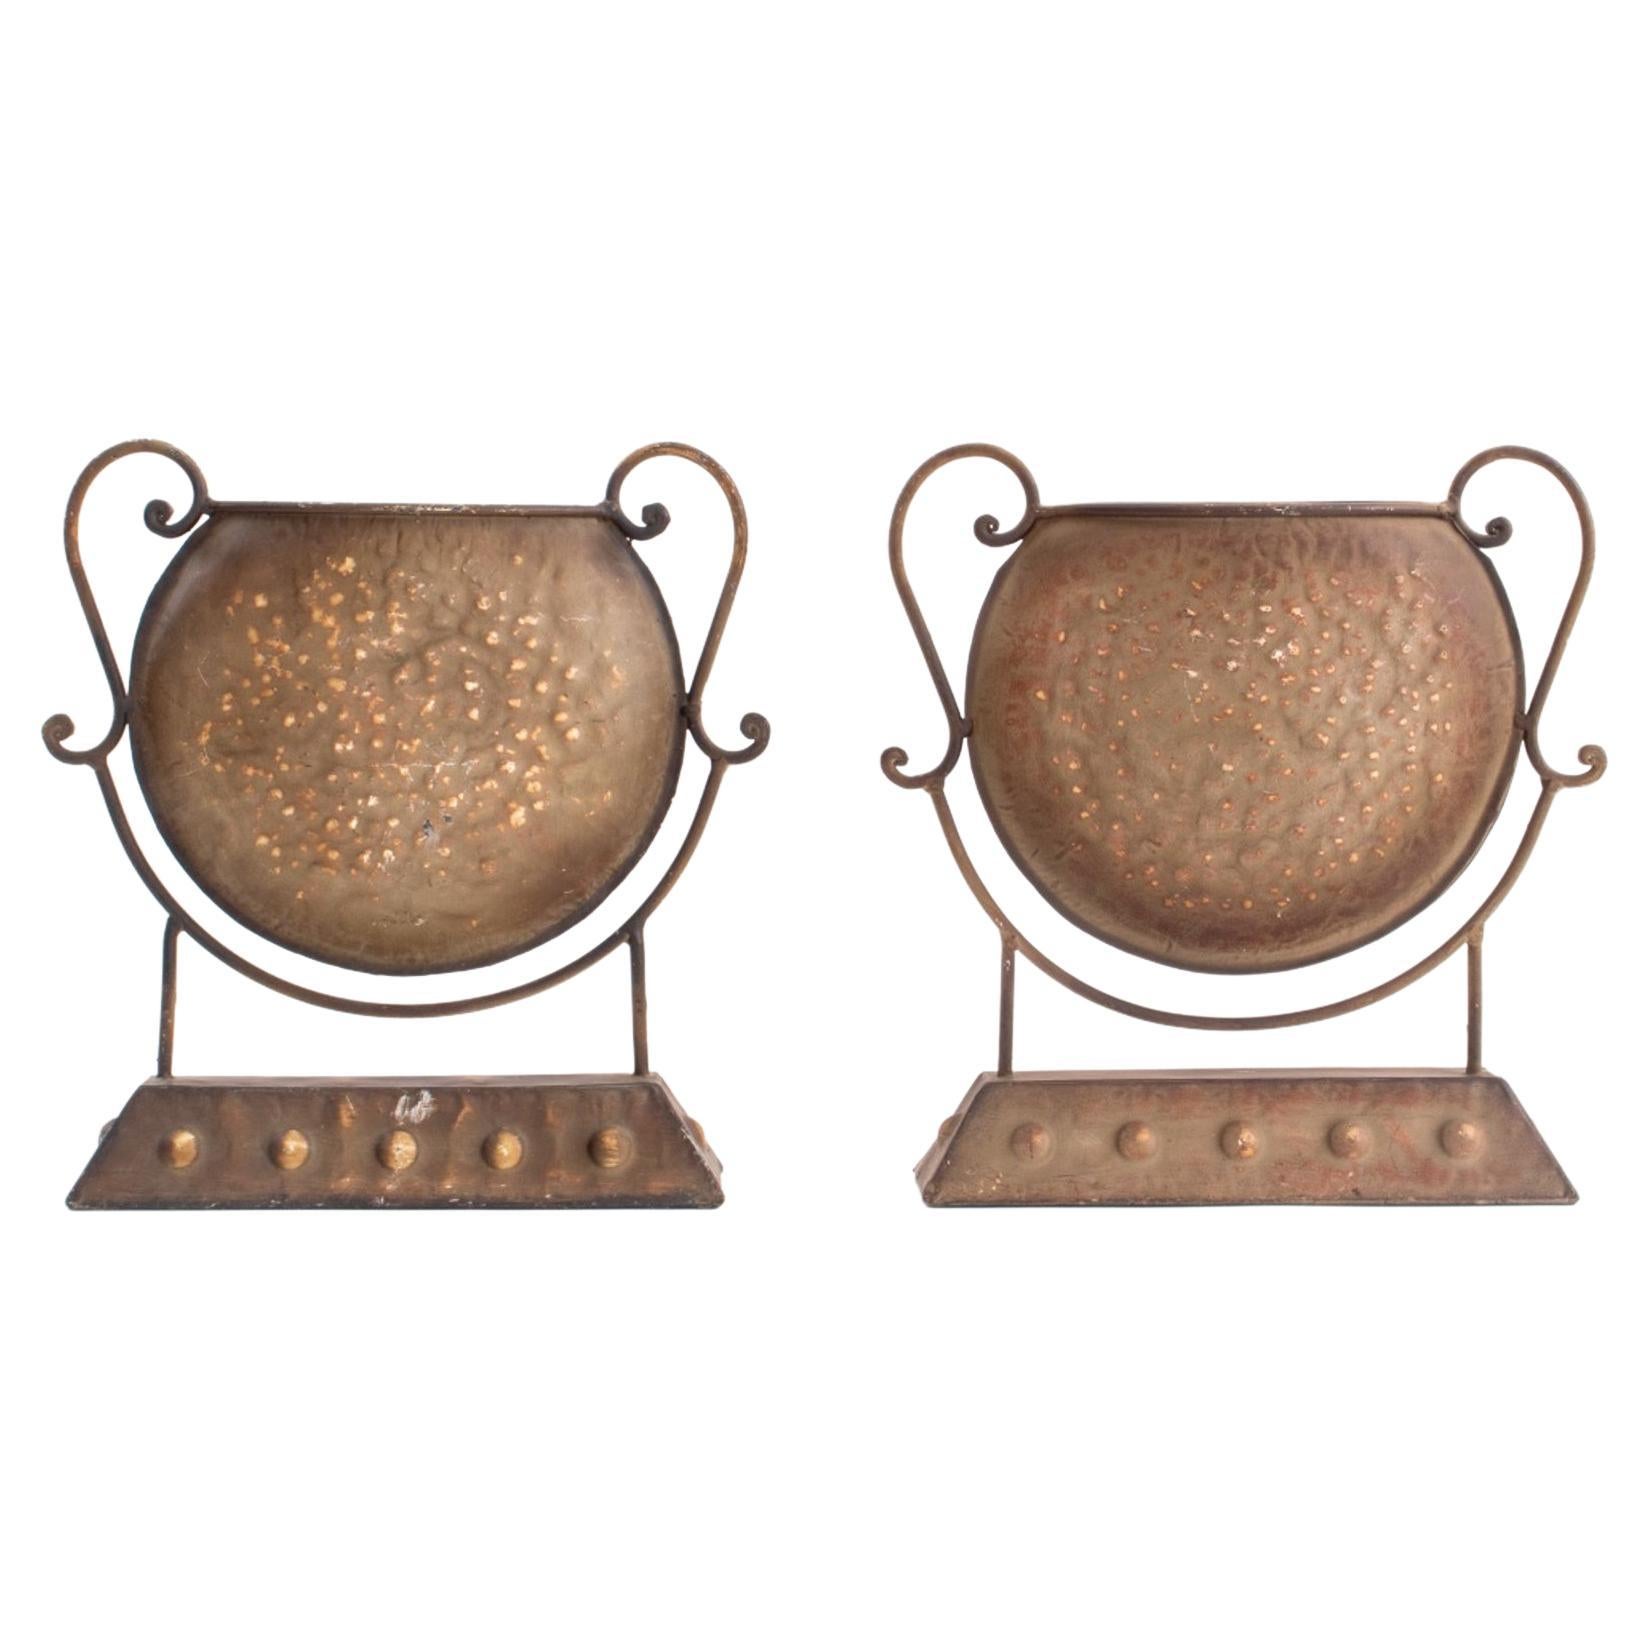 Patinated Metal Plant Vessels on Stands, Pair